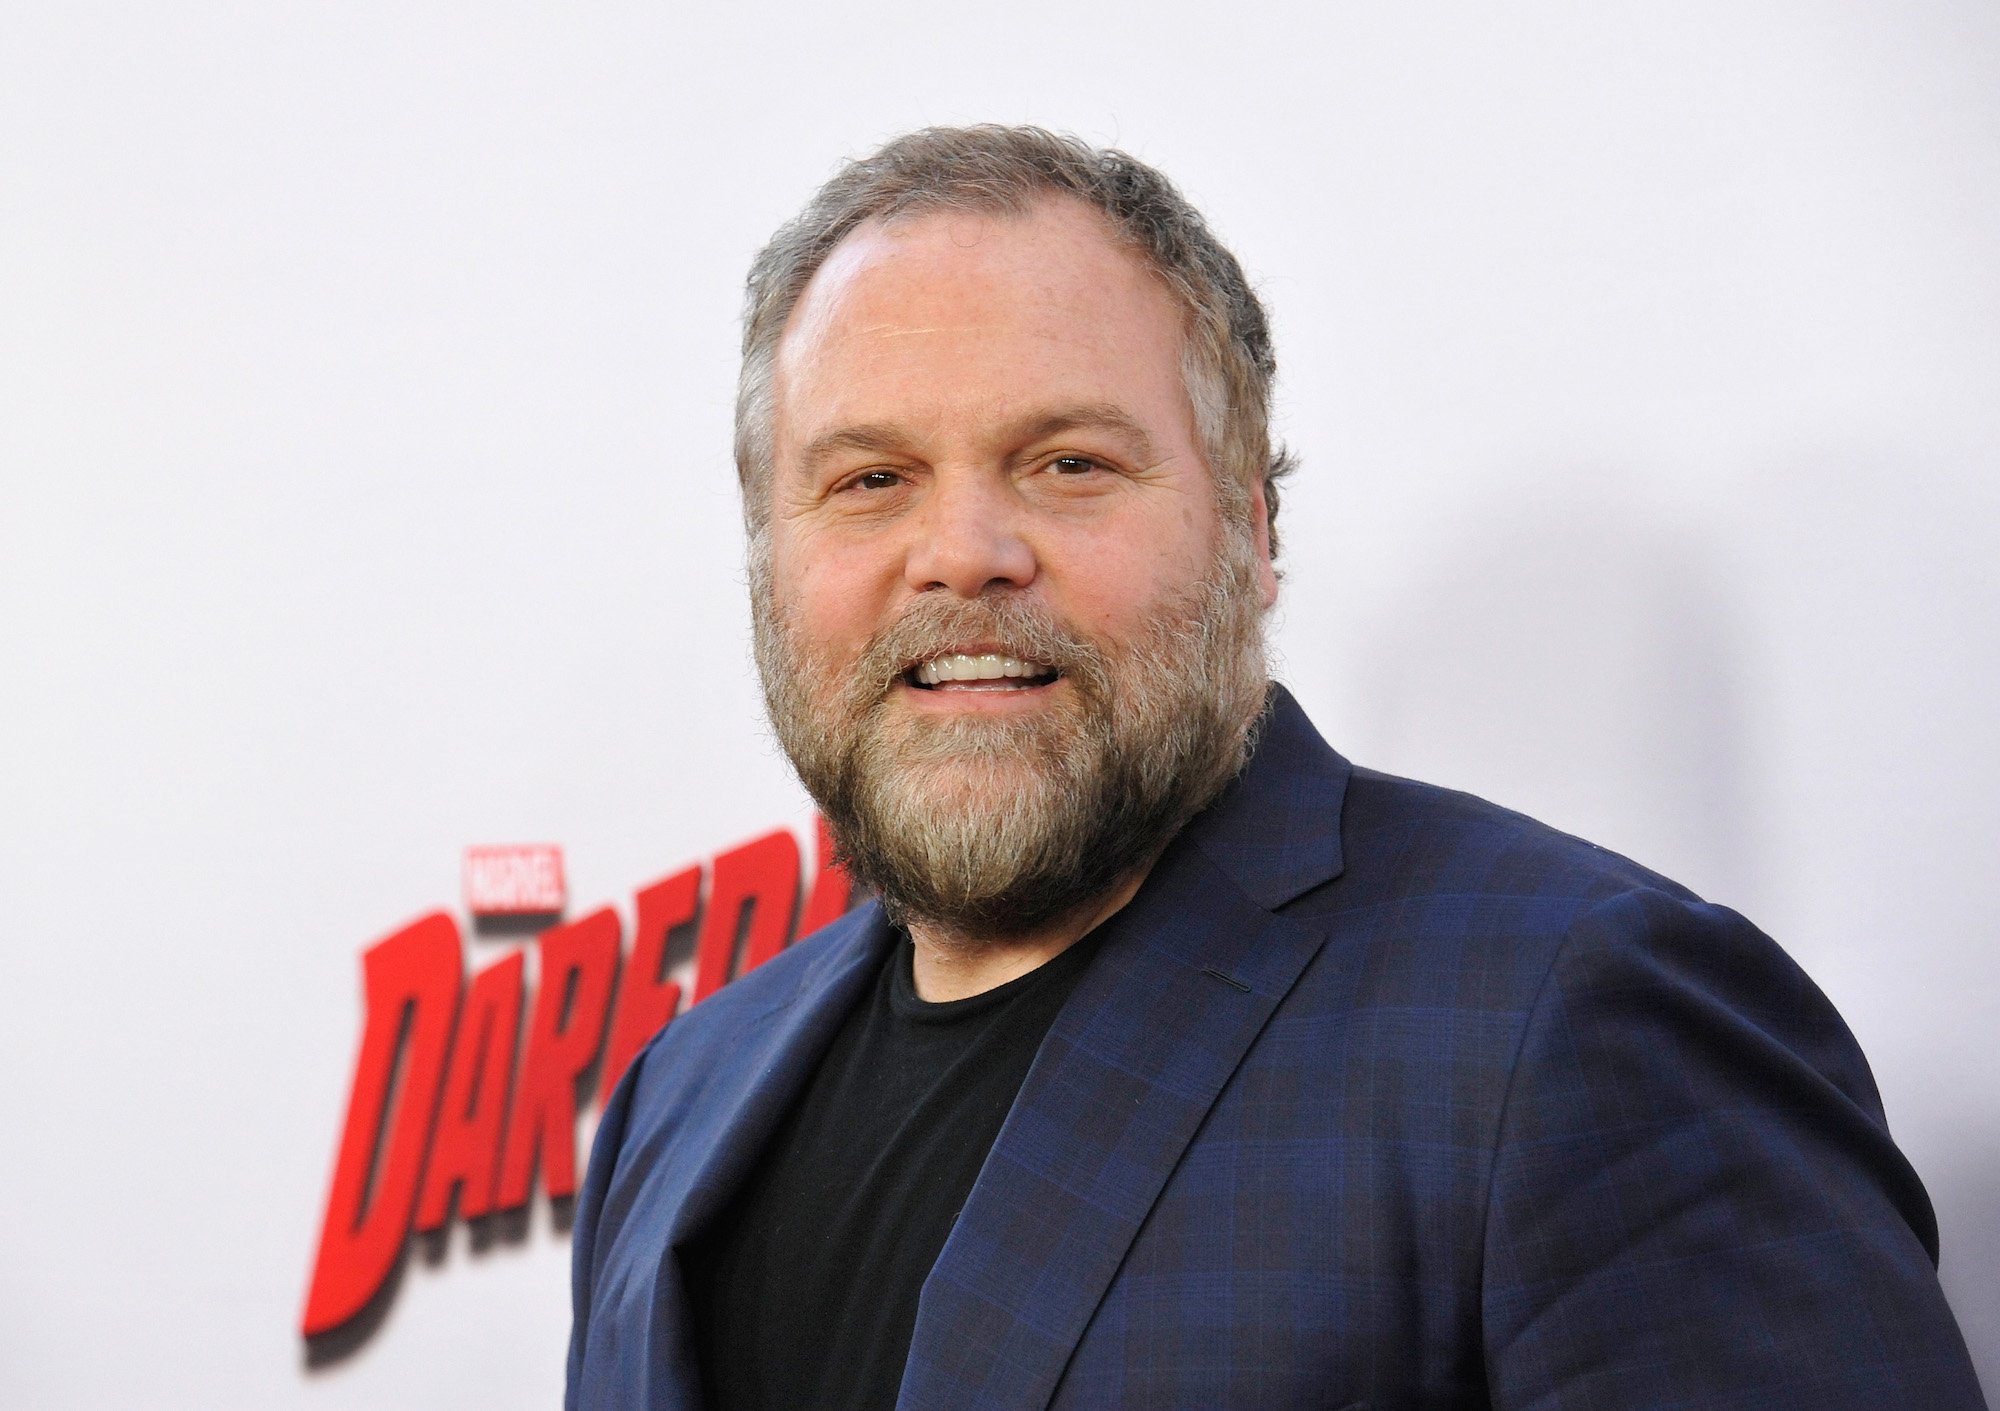 Vincent D'Onofrio smiling in front of a white background